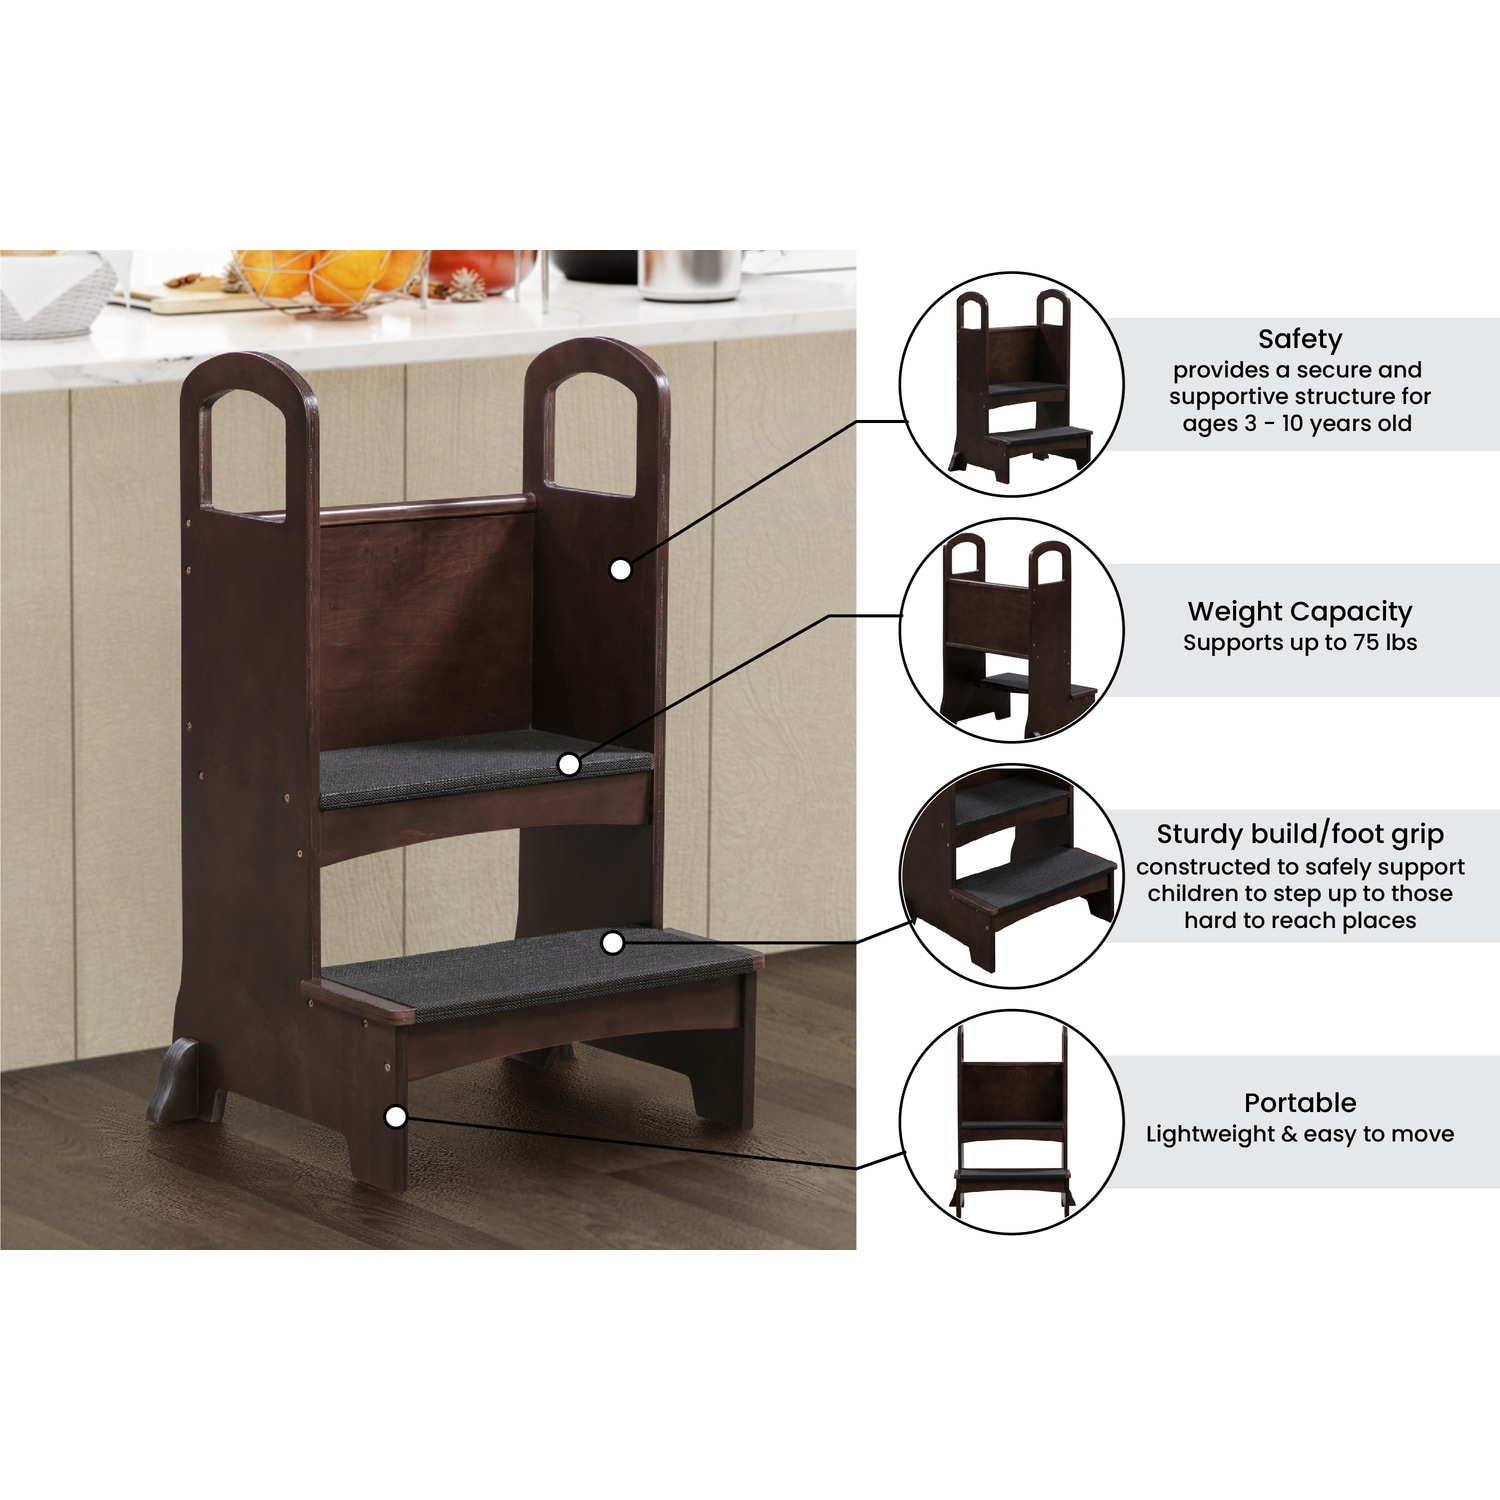 Step to It Kitchen Step Stool with Safety Rail, Kitchen Helper Stool For Toddlers